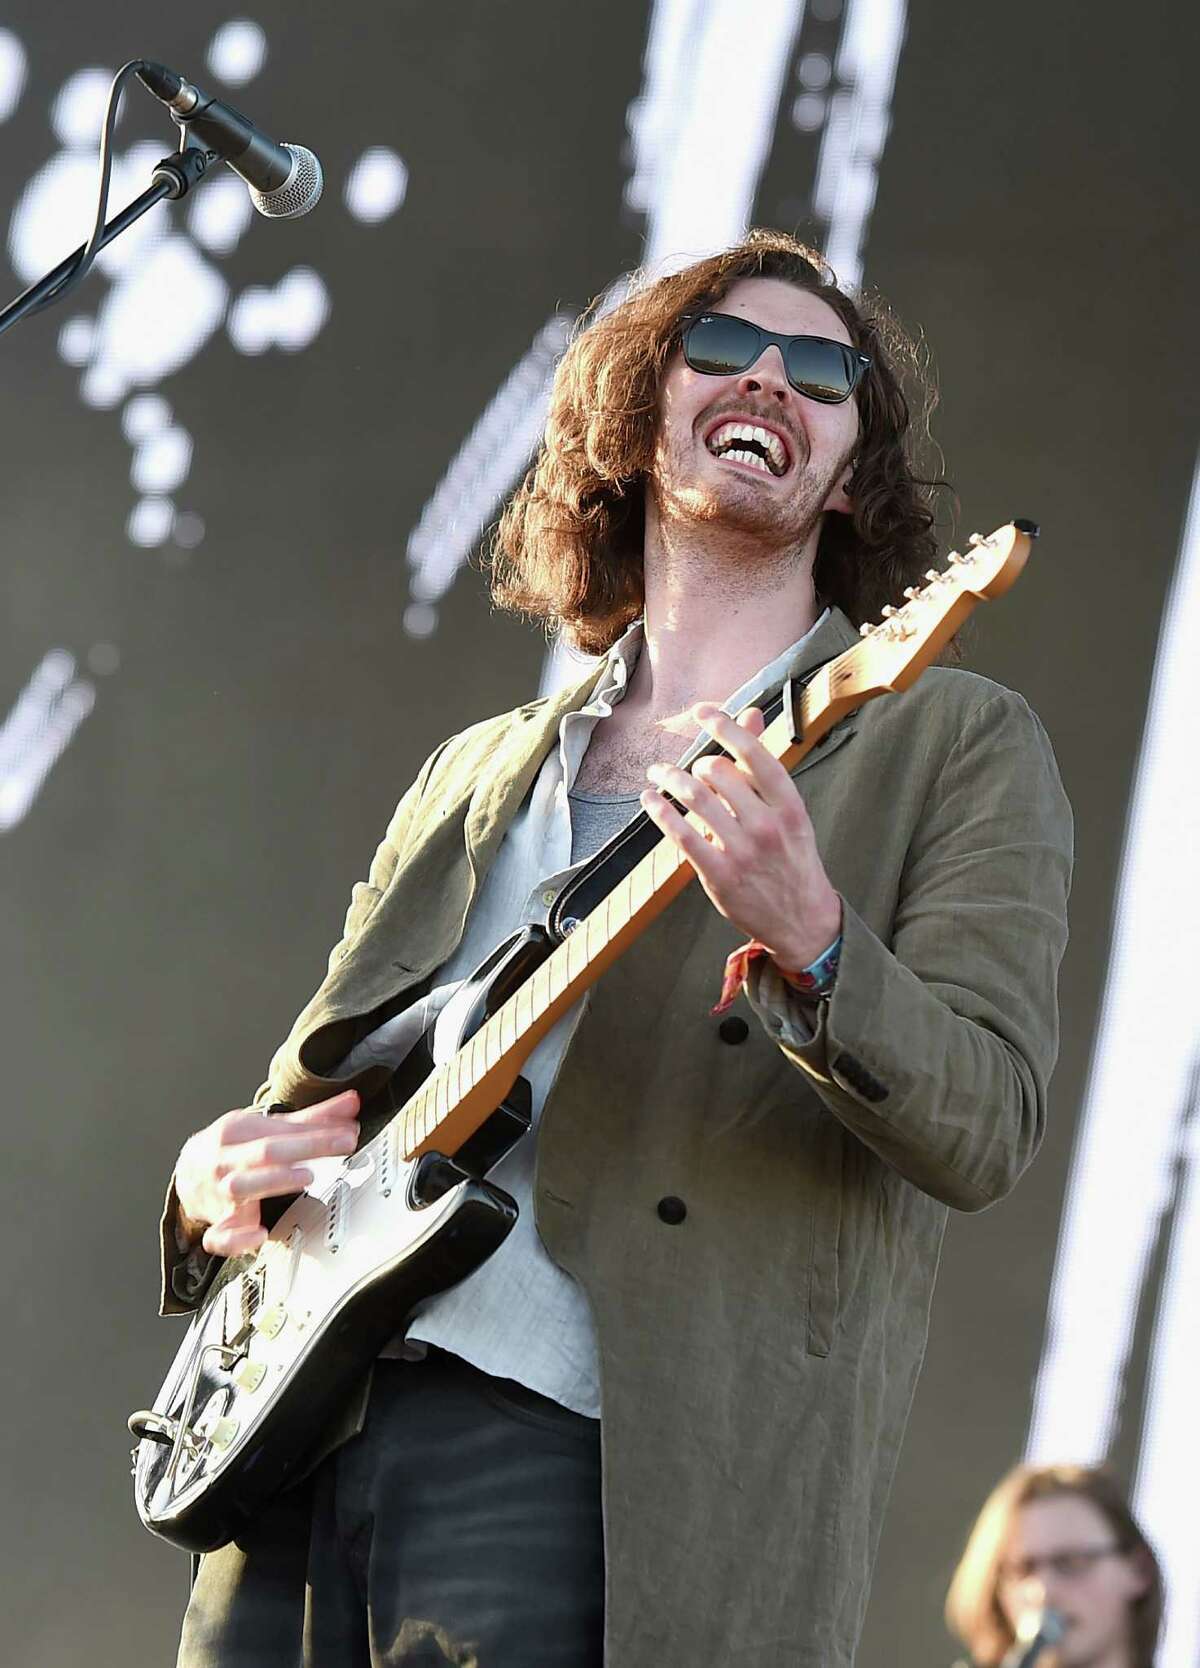 Irish singer Hozier, shown at Coachella, lost his S.F. audience while they waited for his radio hit, “Take Me to Church.”